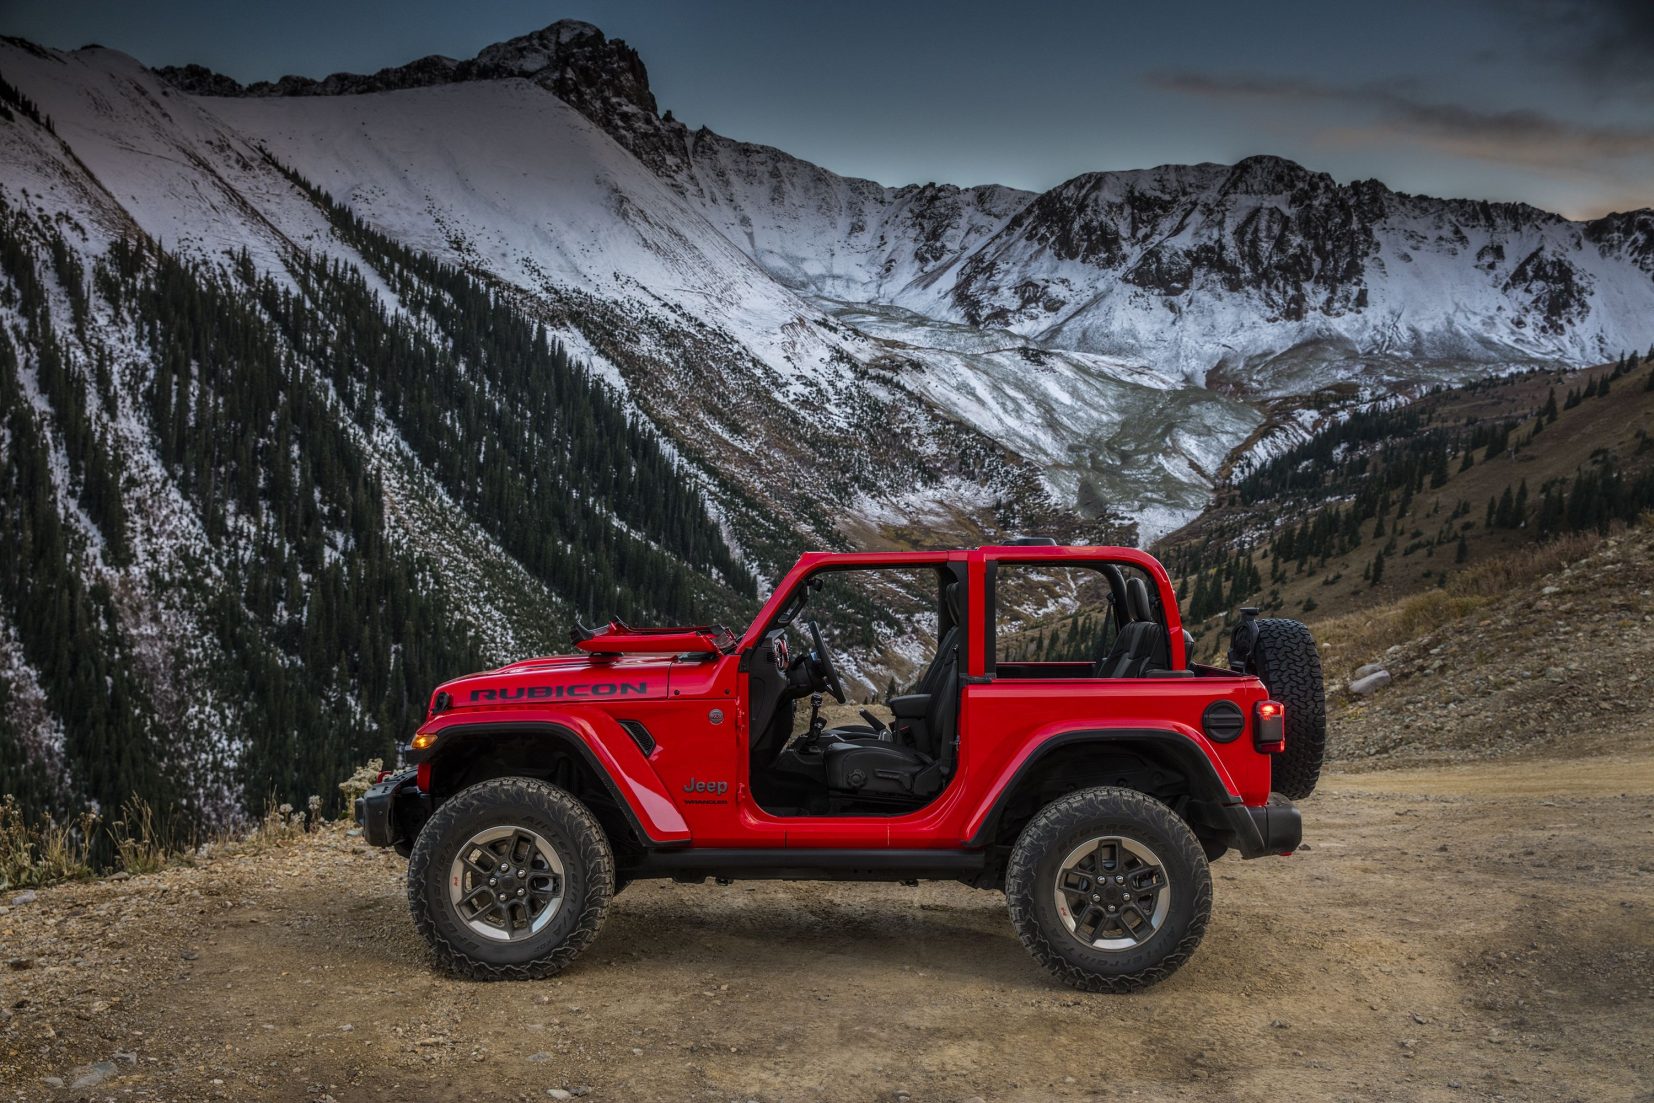 2019 Jeep Wrangler Top High Resolution Wallpapers - New Jeep Wrangler 2018 - HD Wallpaper 